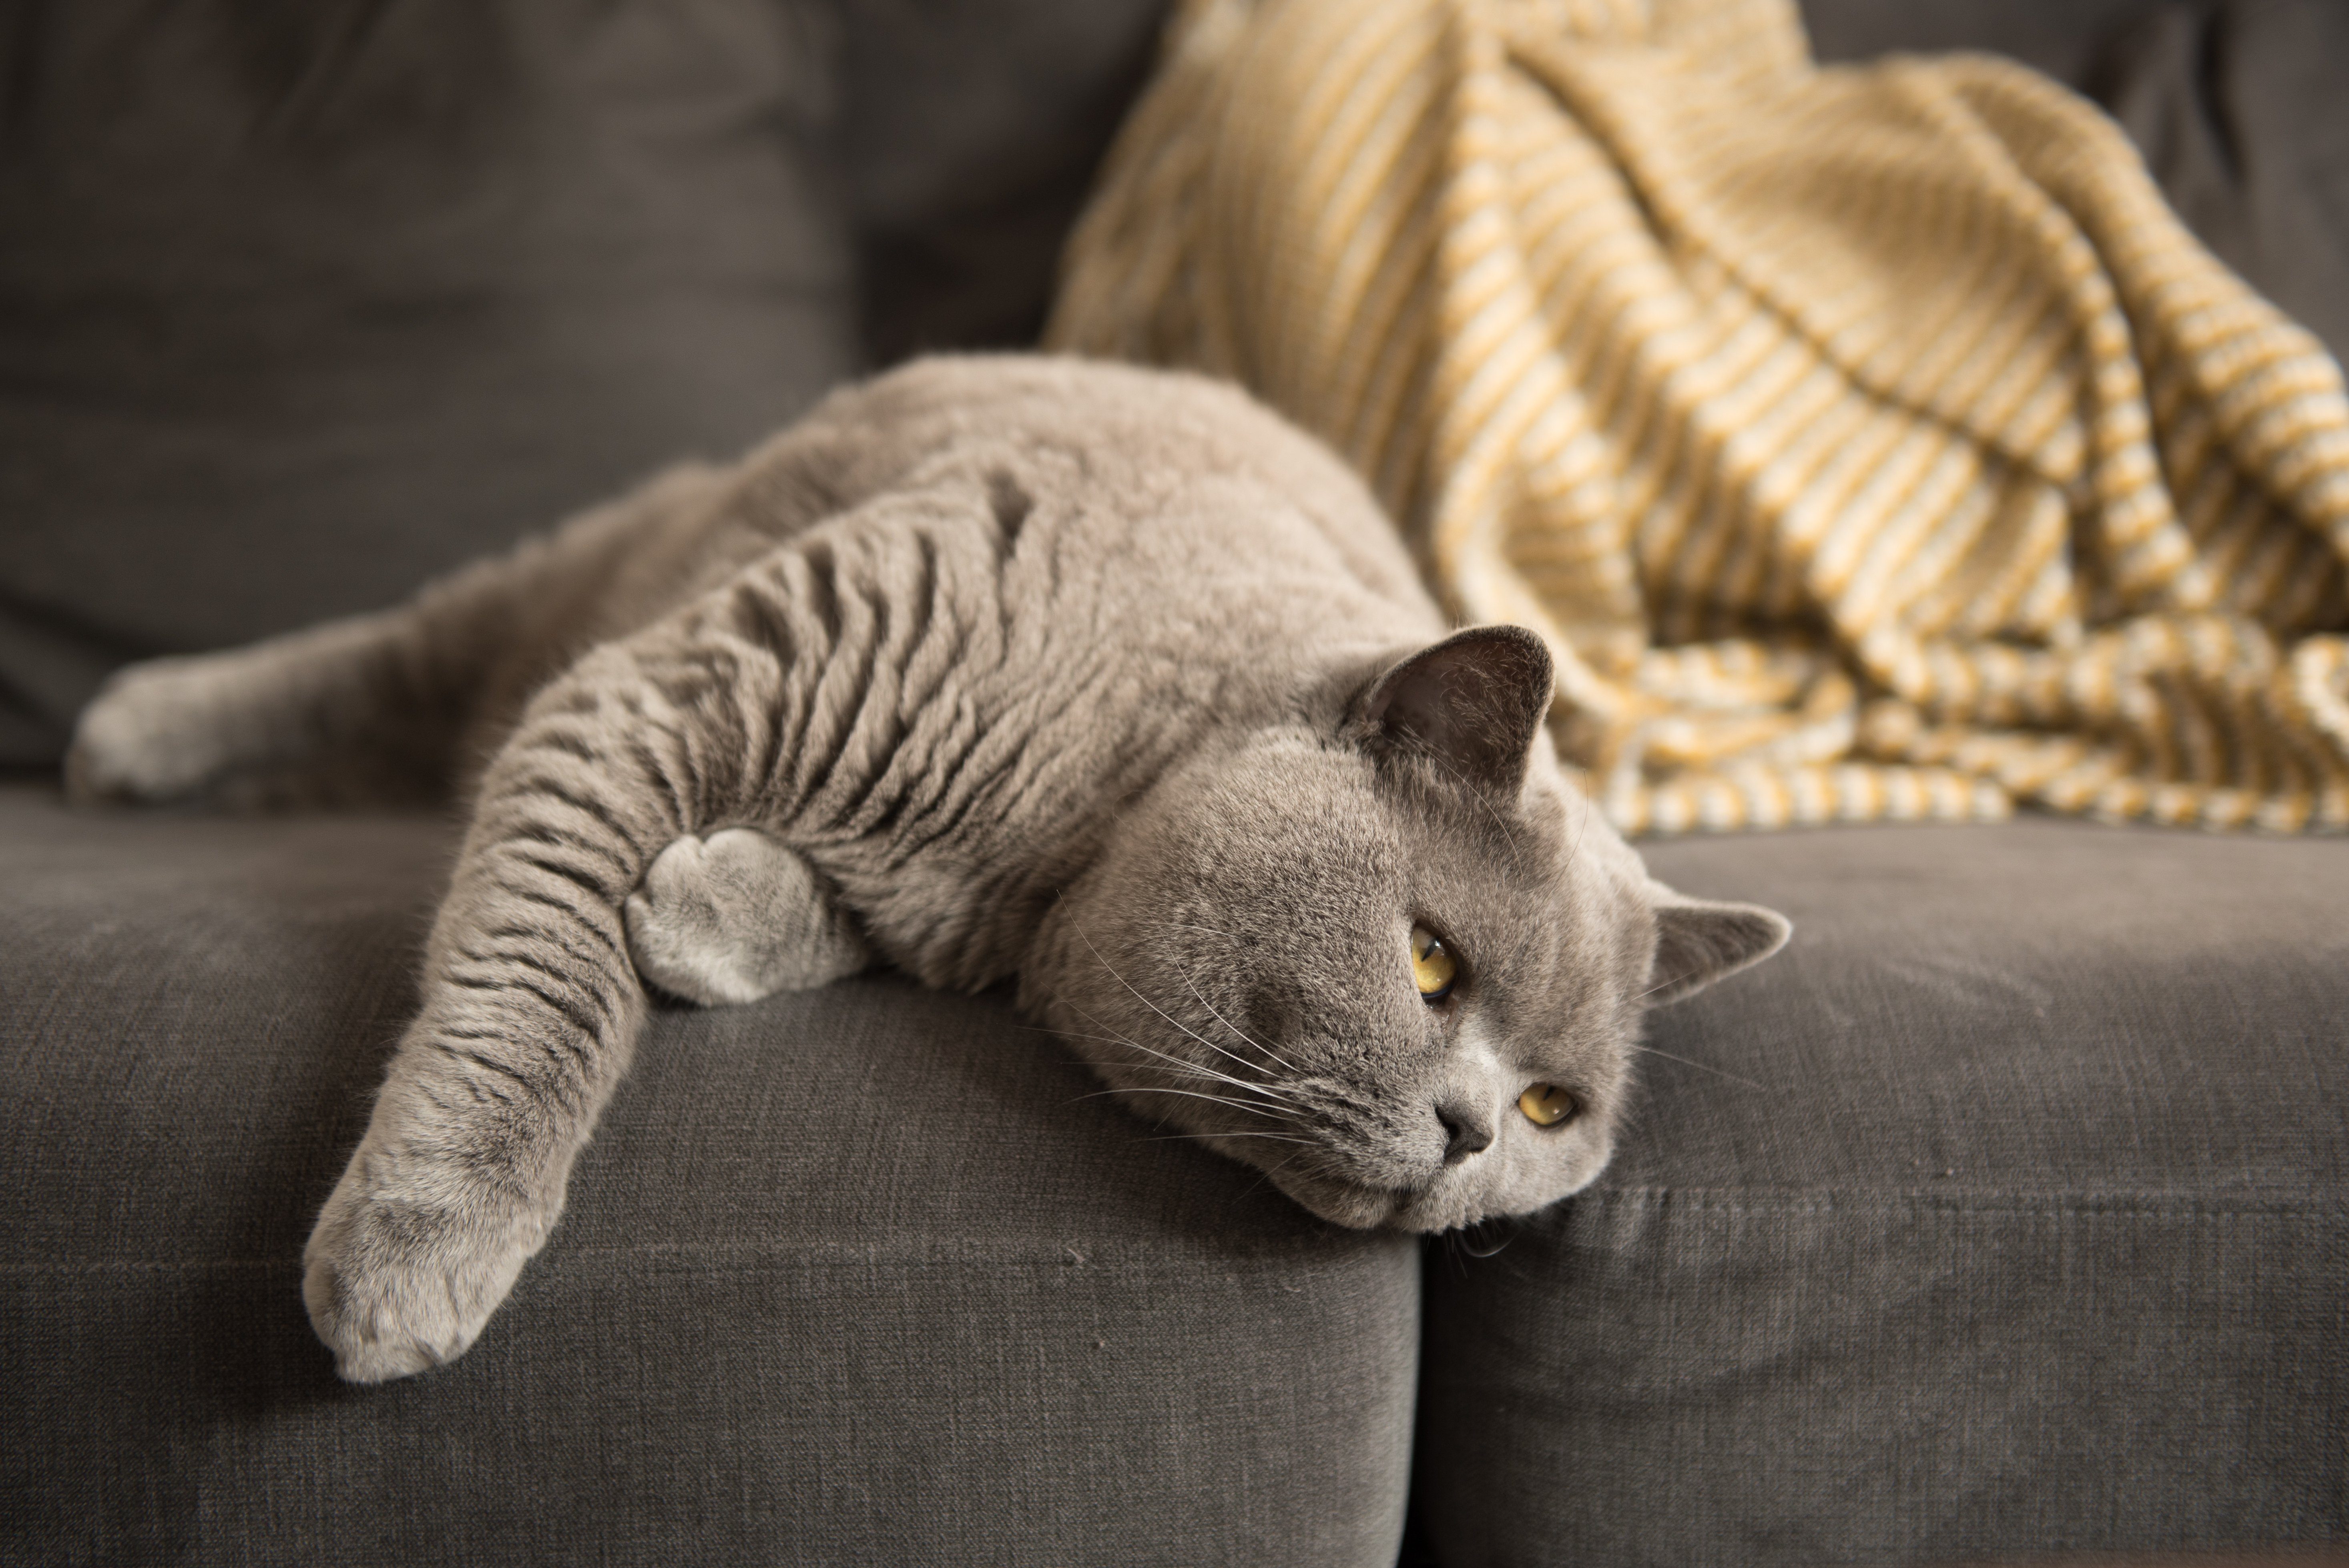 A British Shorthair cat looks away as she lies on the edge of a grey sofa in a house in Edinburgh City, Scotland, UK, where, where a yellow blanket can be seen in the background